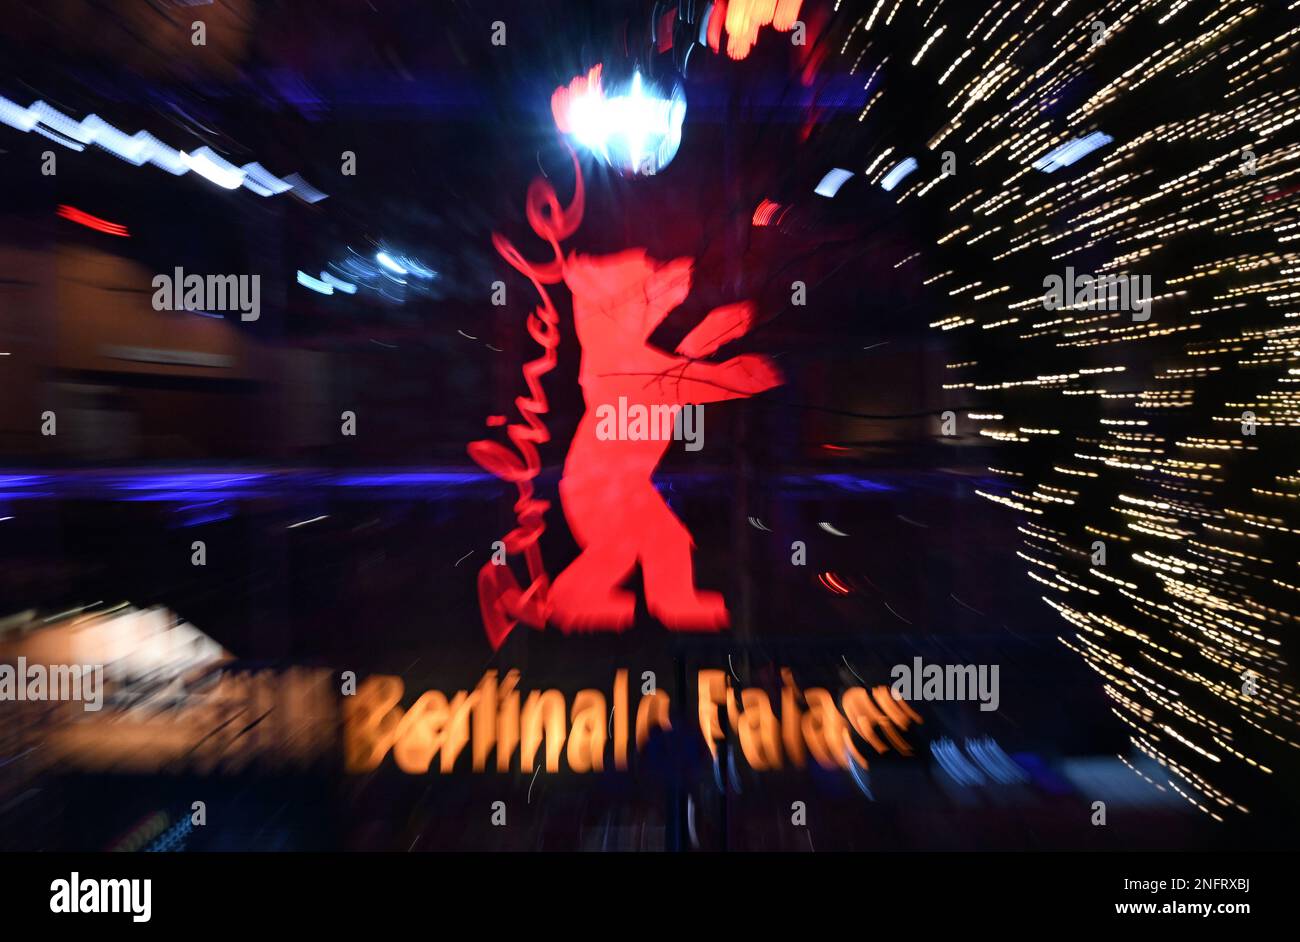 Berlin, Germany. 17th Feb, 2023. The Berlinale logo can be seen at the Berlinale Palast. The Berlinale is one of the major film festivals and lasts until February 26, 2023. Credit: Jens Kalaene/dpa/Alamy Live News Stock Photo